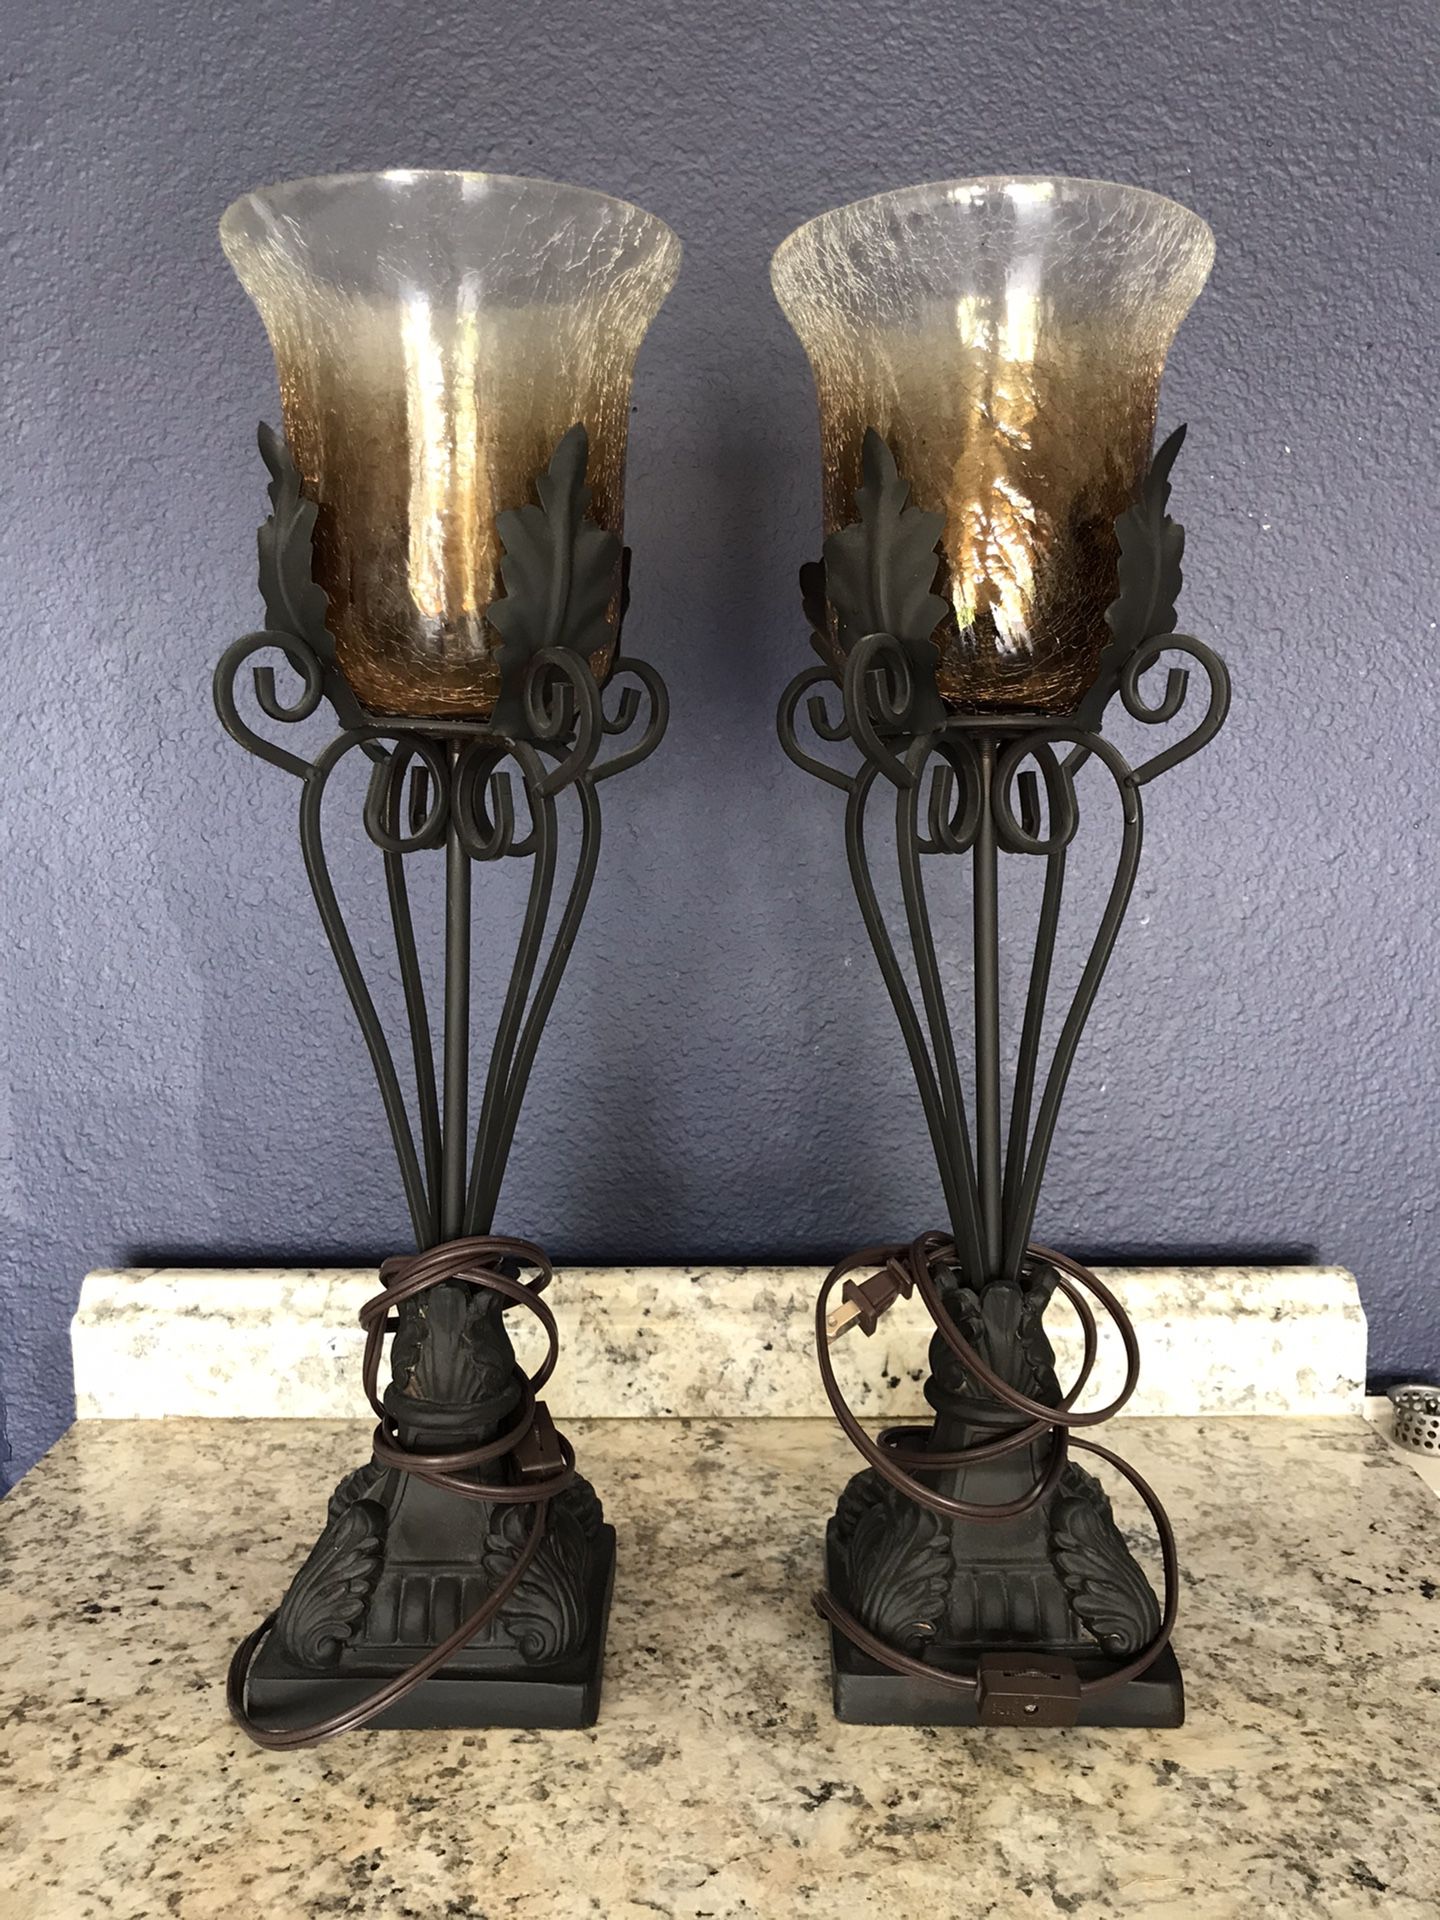 Wrought Iron and Glass Decorative Lamps